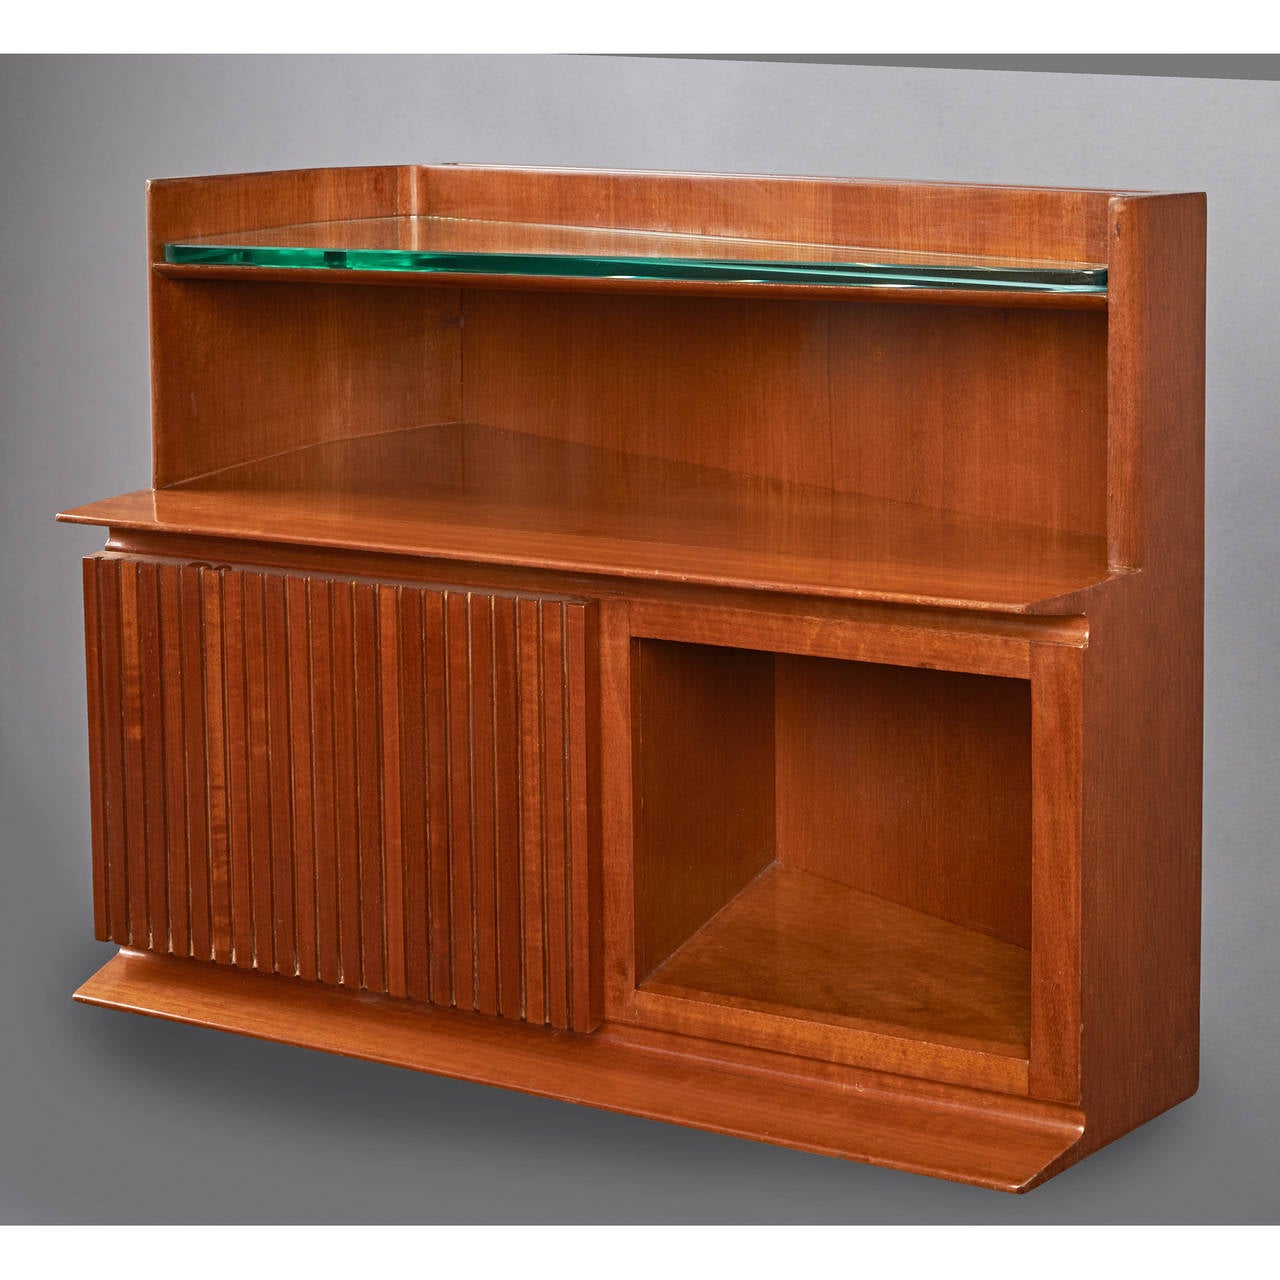 Italy, 1950s.
Pair of angular mahogany wall-mounted trapezoidal bedside tables with open niche and enclosed storage with hinged door. Glass lined shelf above.
The cabinet tapers in towards the bed for ease of access.
Measures: 23.5 W x 14 D x 18